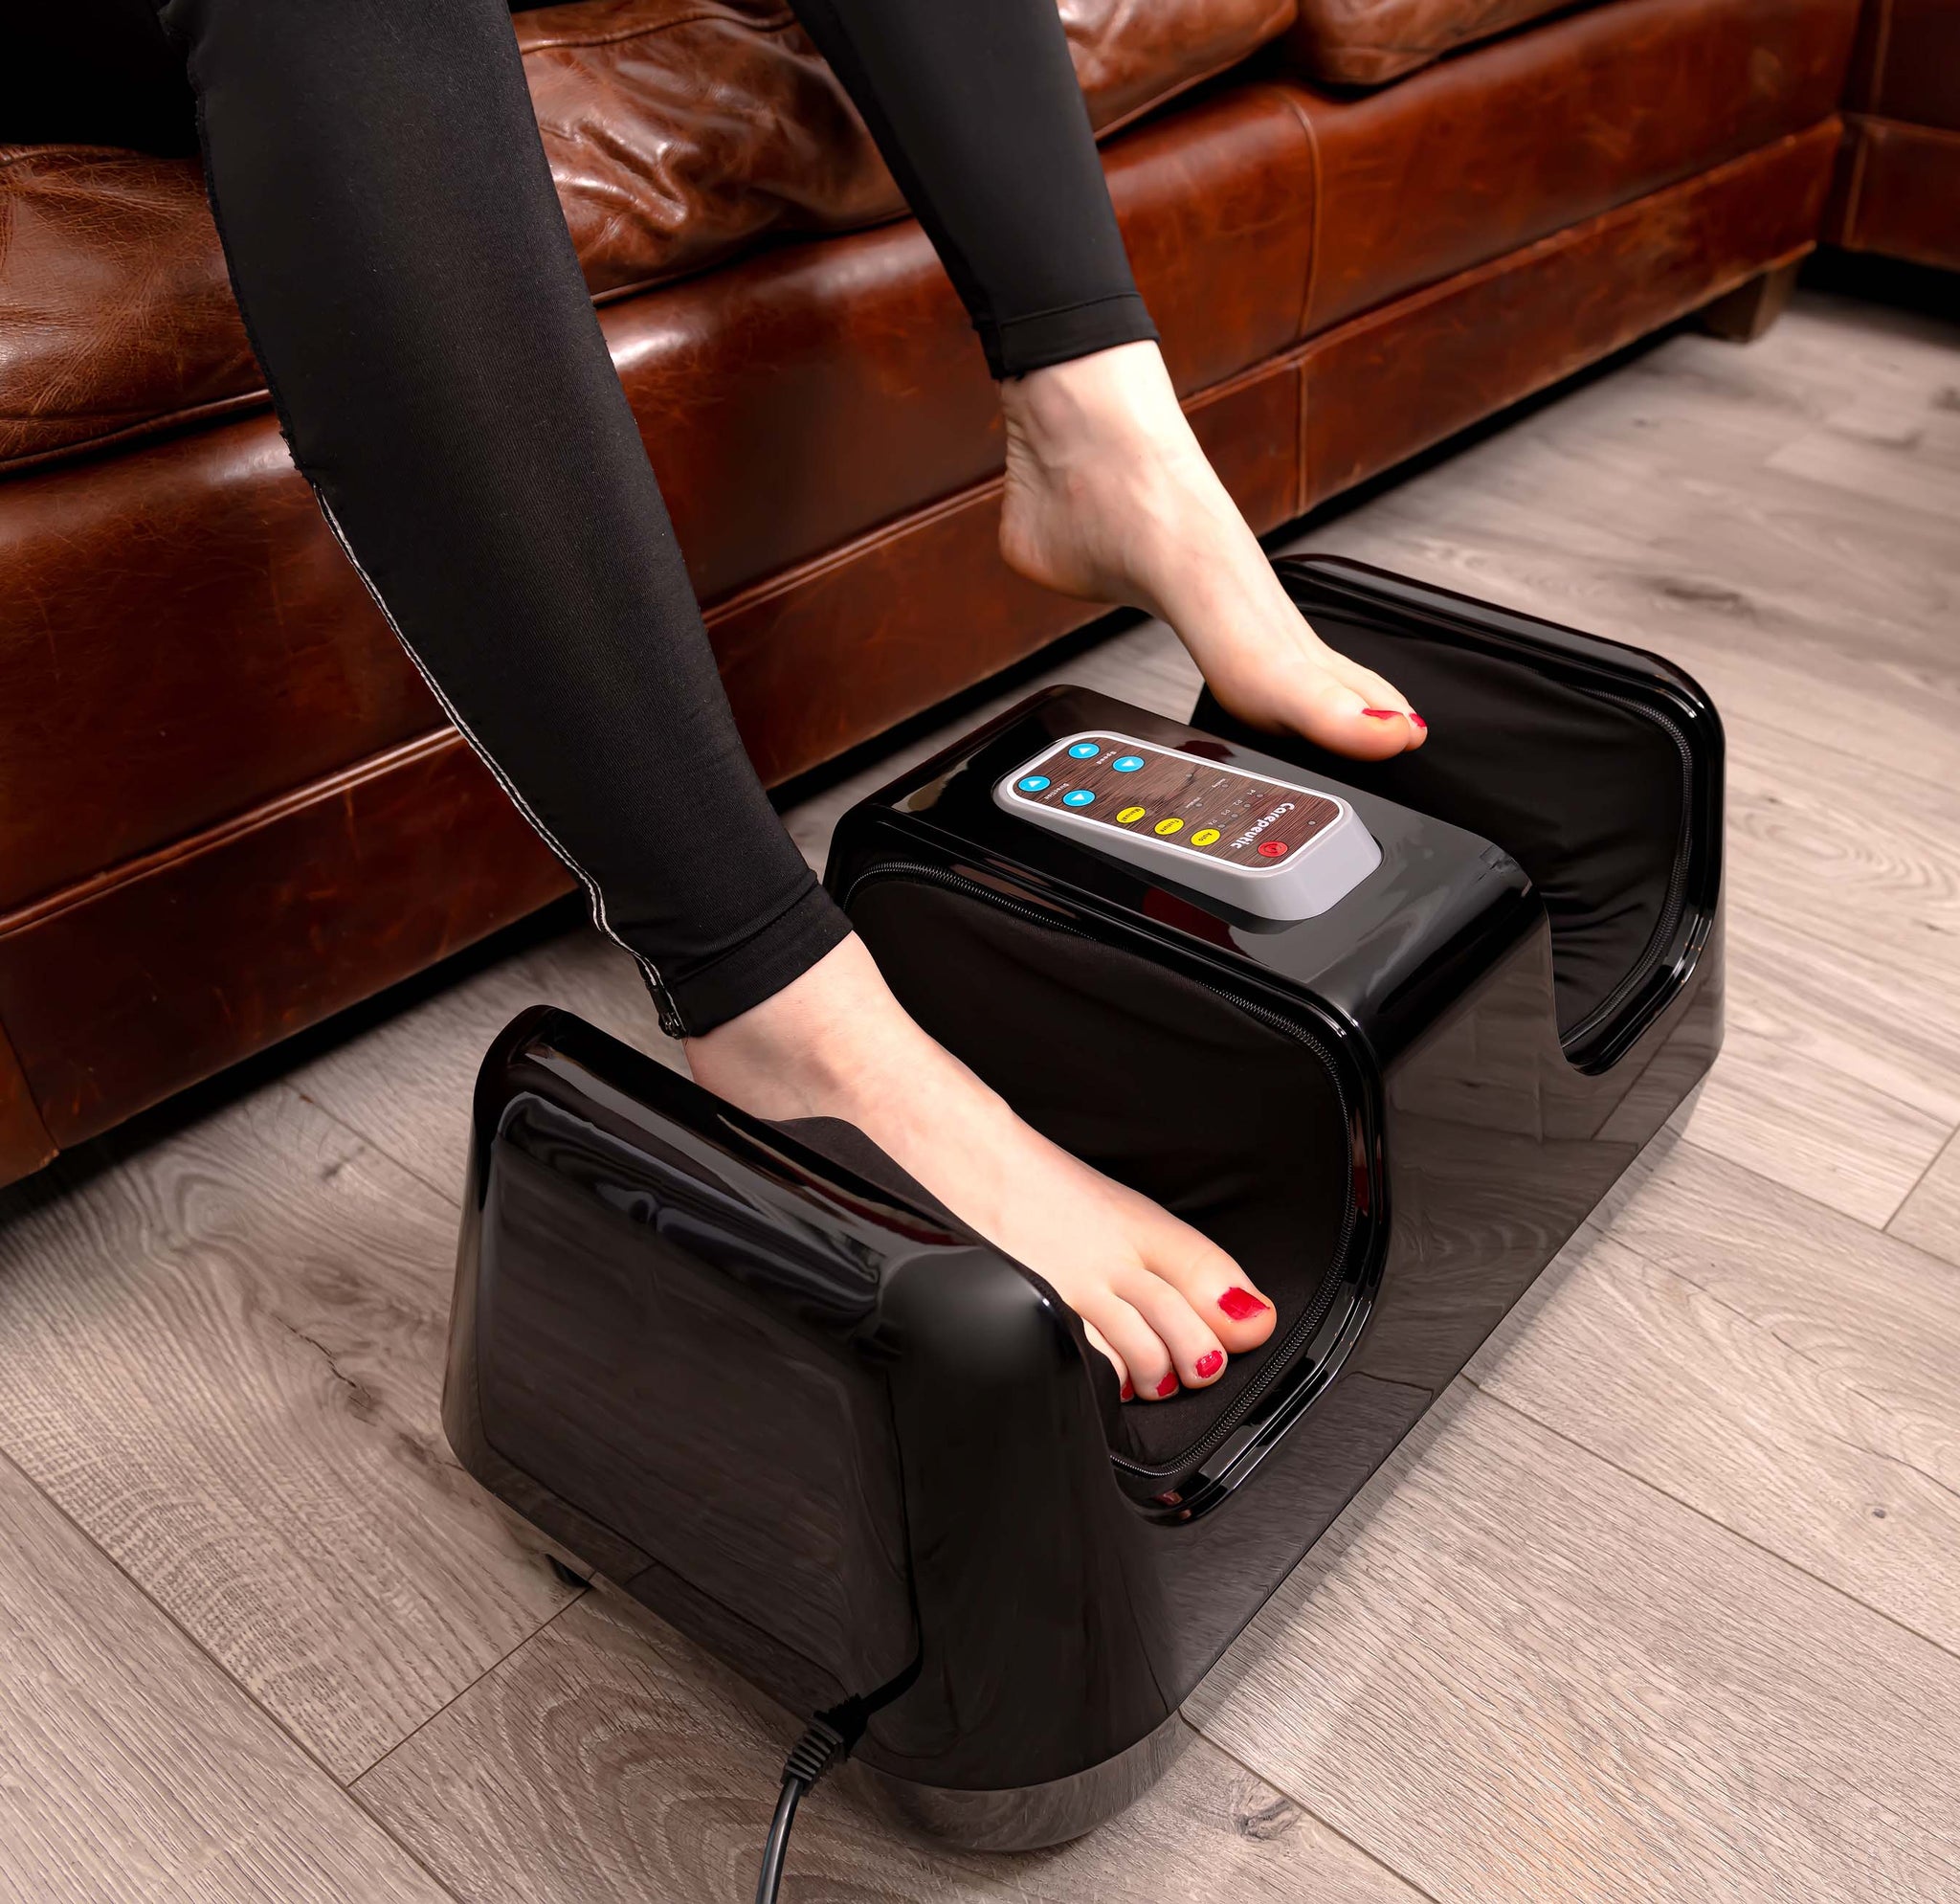 Carepeutic Deluxe Shiatsu Foot Massager with Kneading Rolling Vibratio –  Carepeutic Outlet